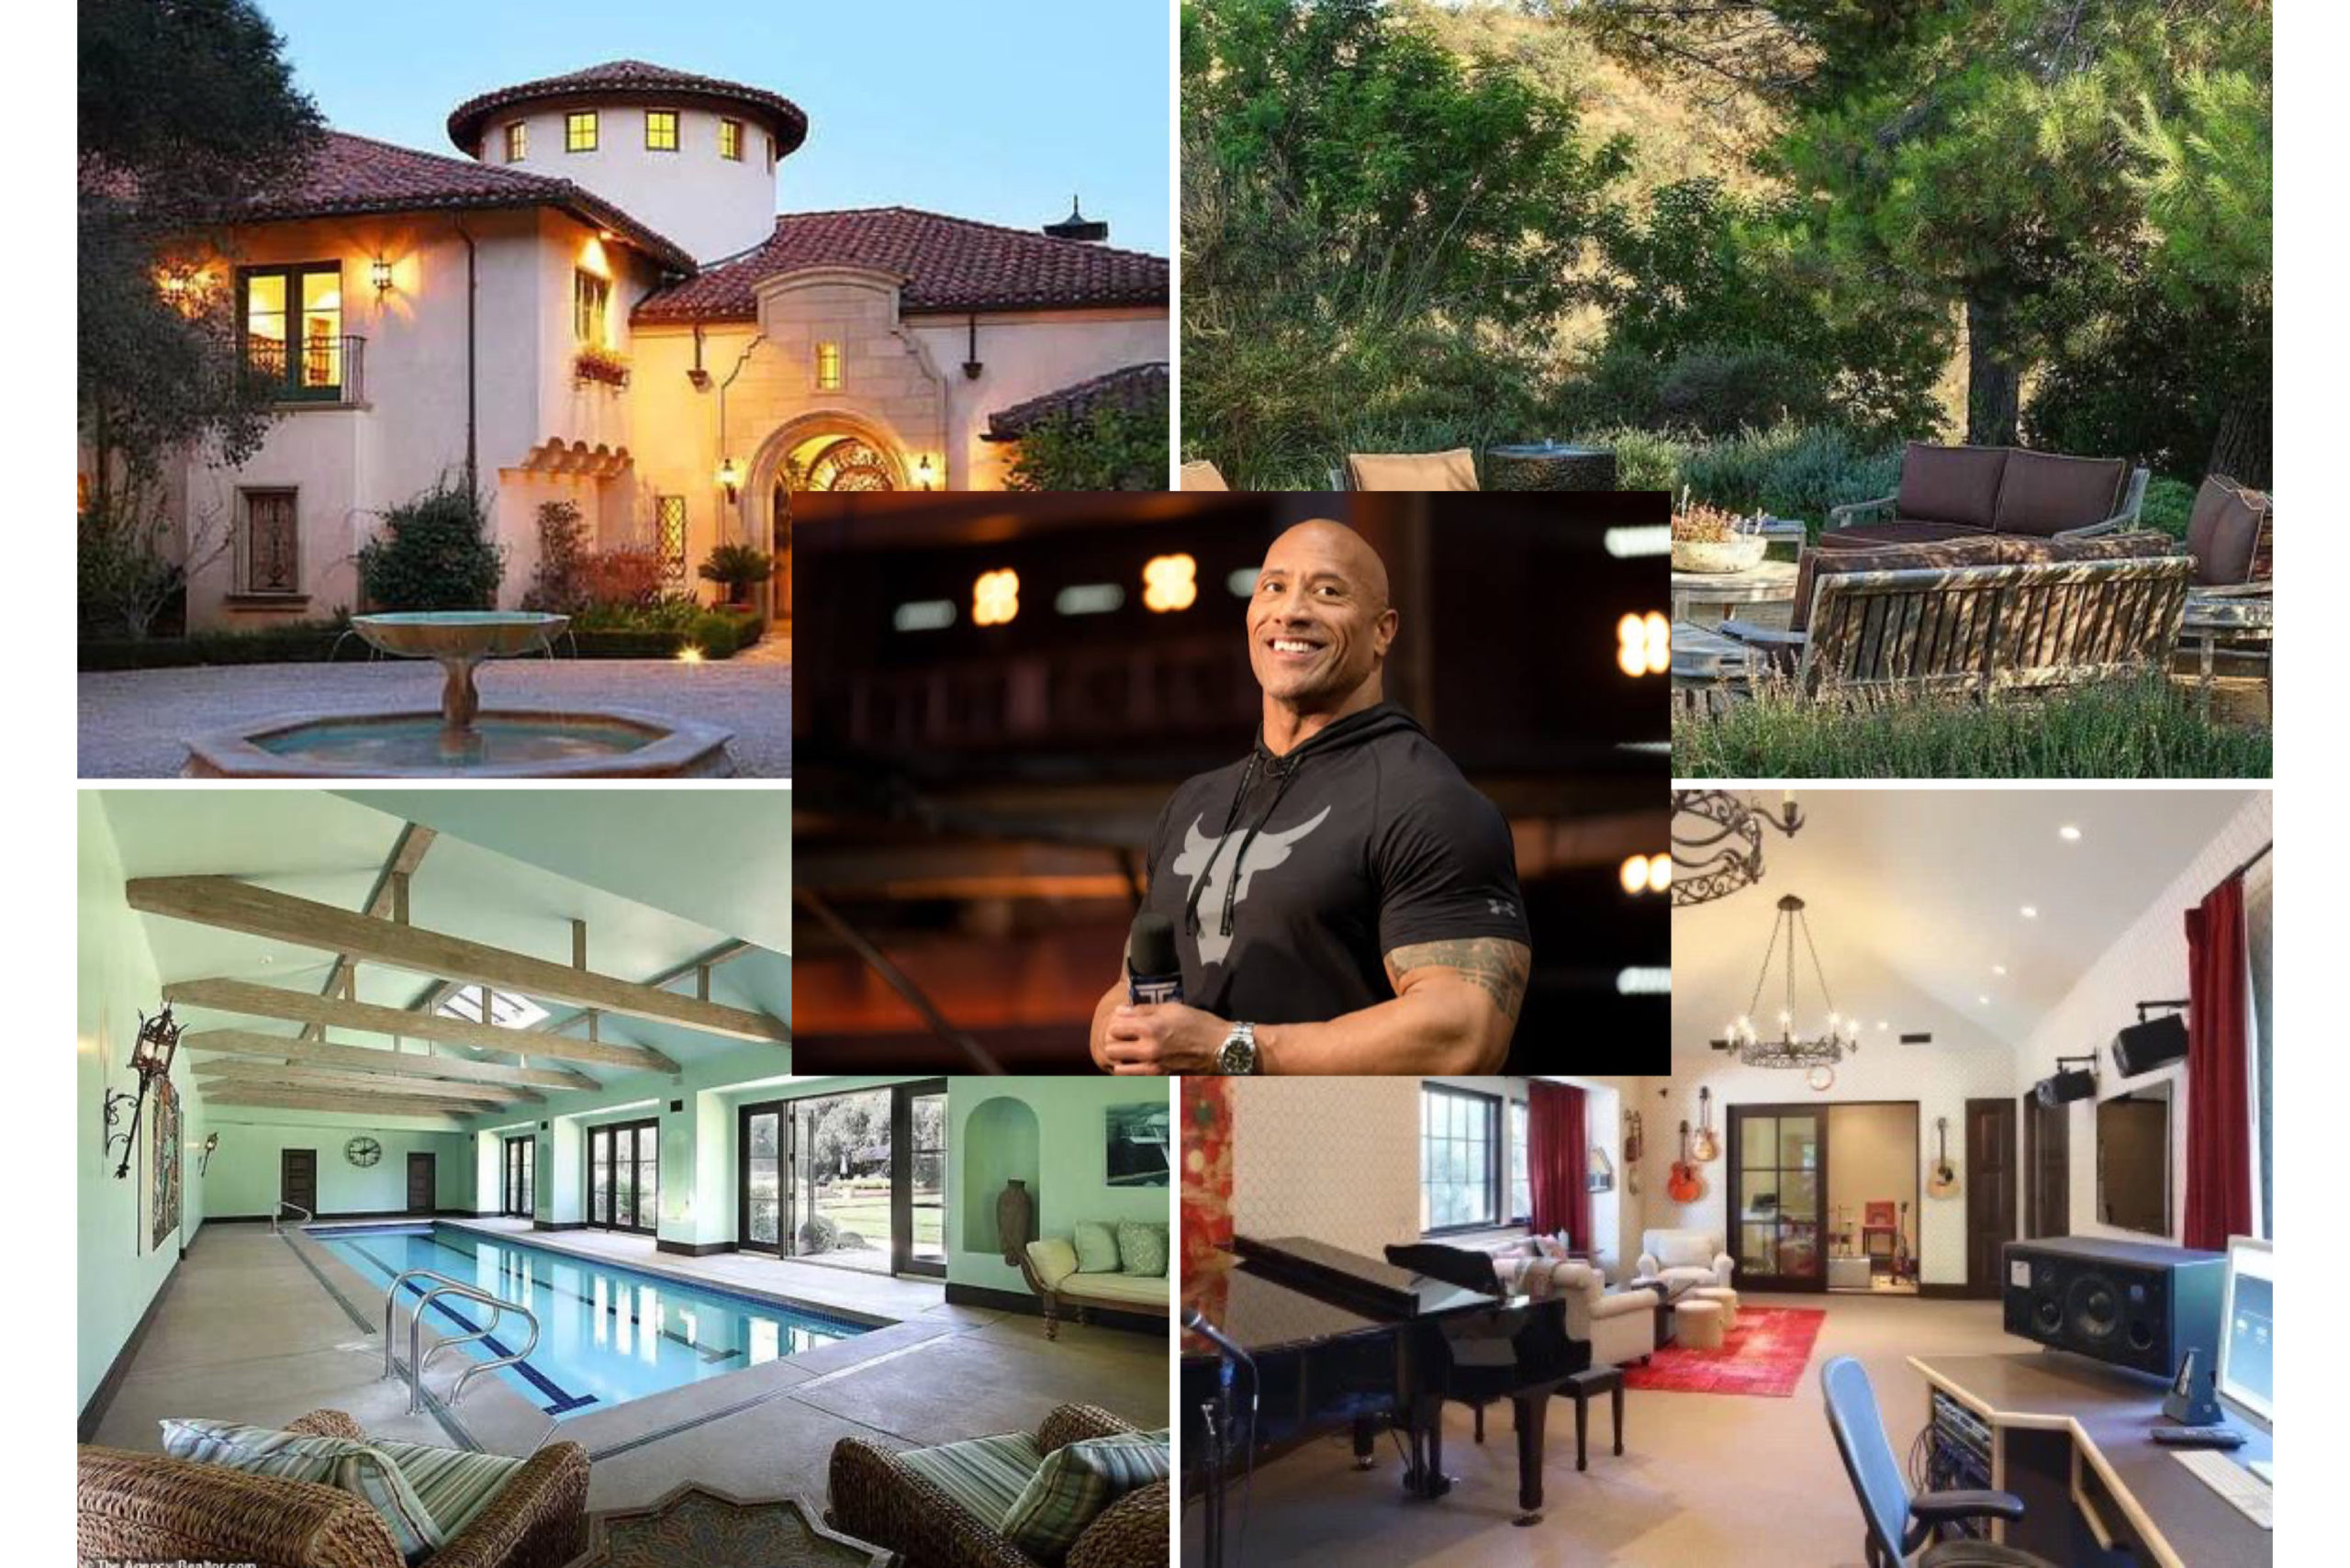 The Rock, WWE Legend And Actor, Acquires Six-Bedroom Mansion For $27.8m